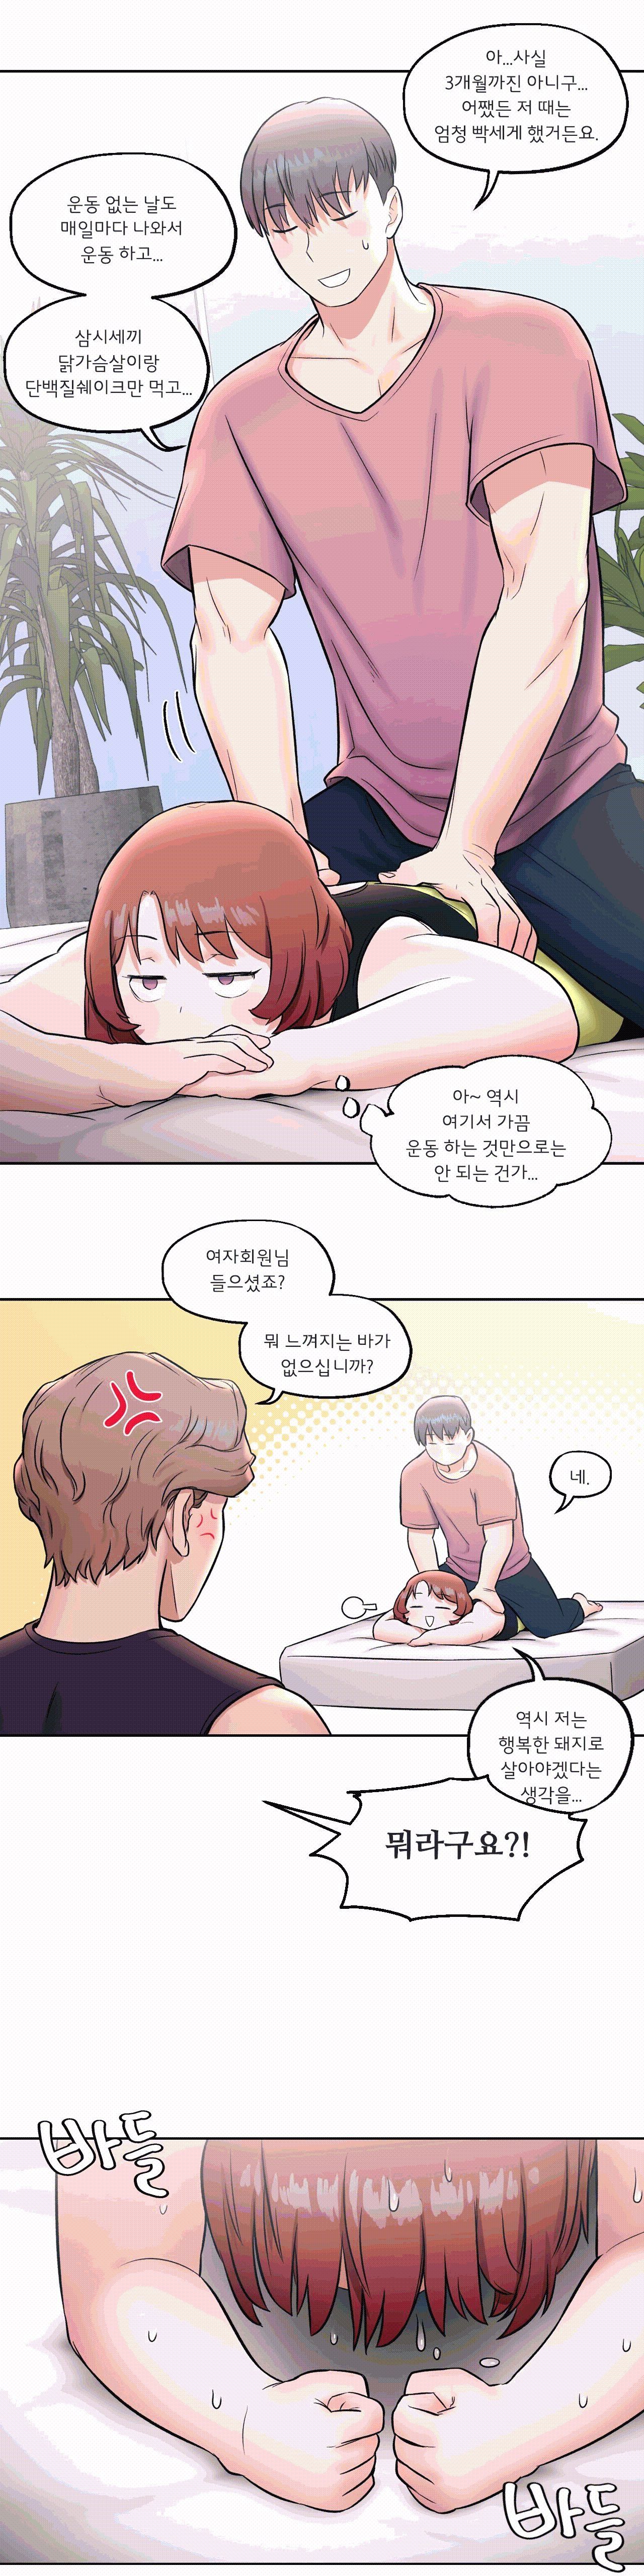 Sexercise Raw - Chapter 23 Page 6